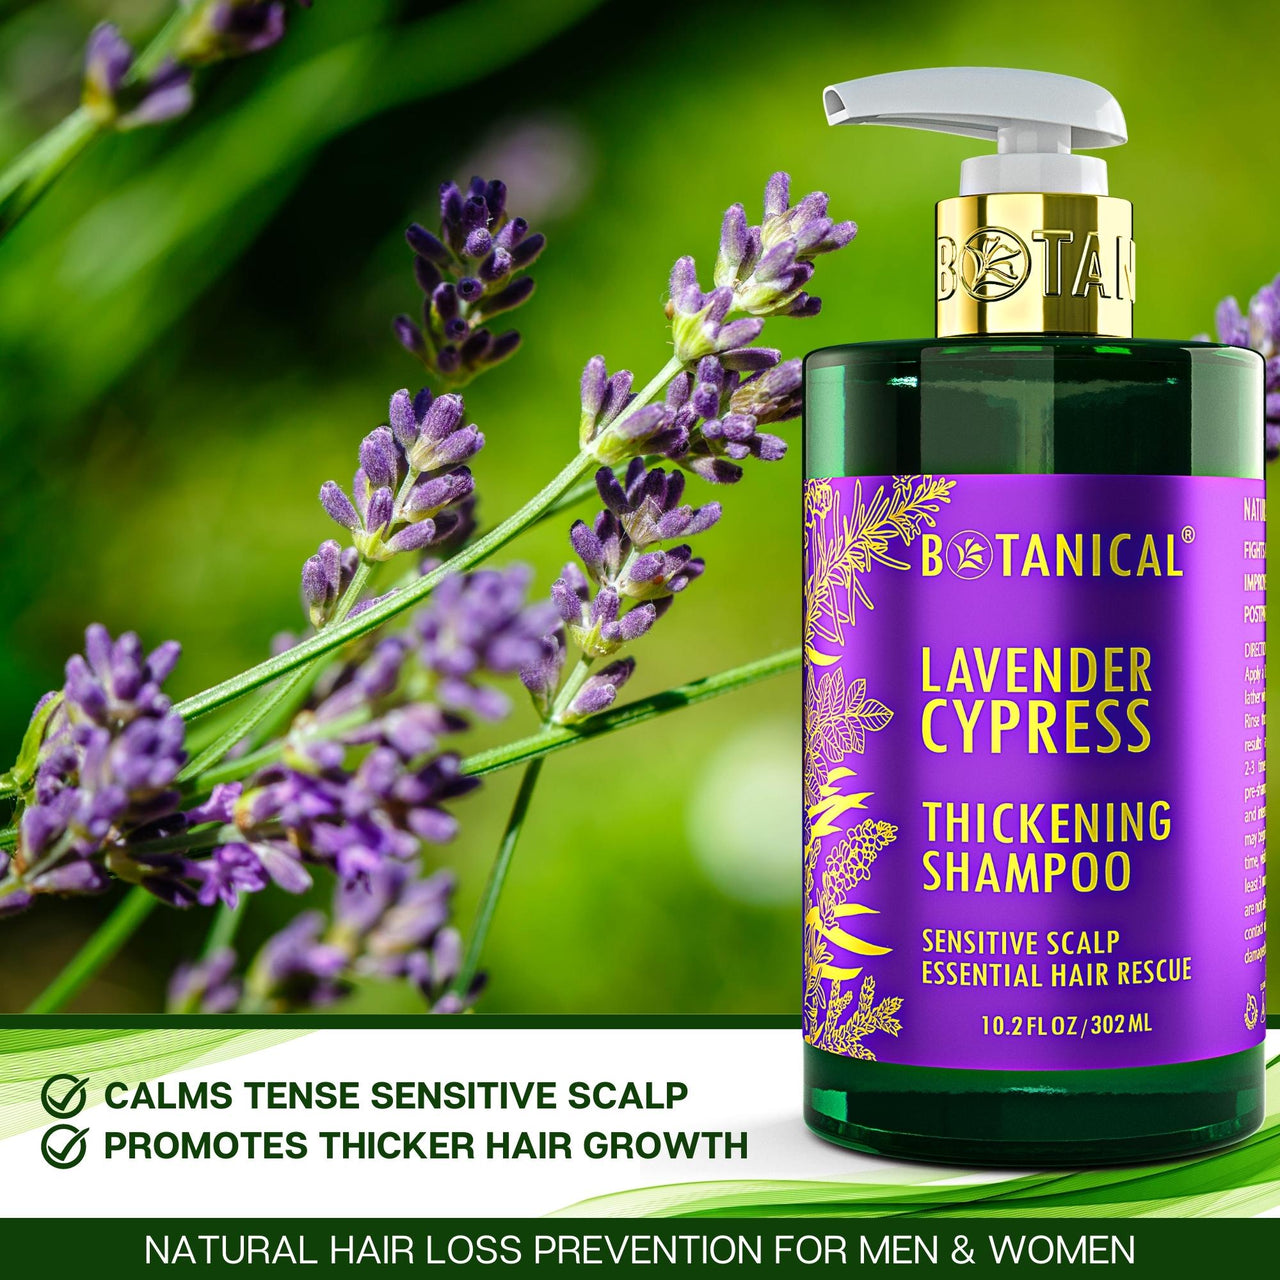 Lavender Cypress Shampoo for hair thinning prevention